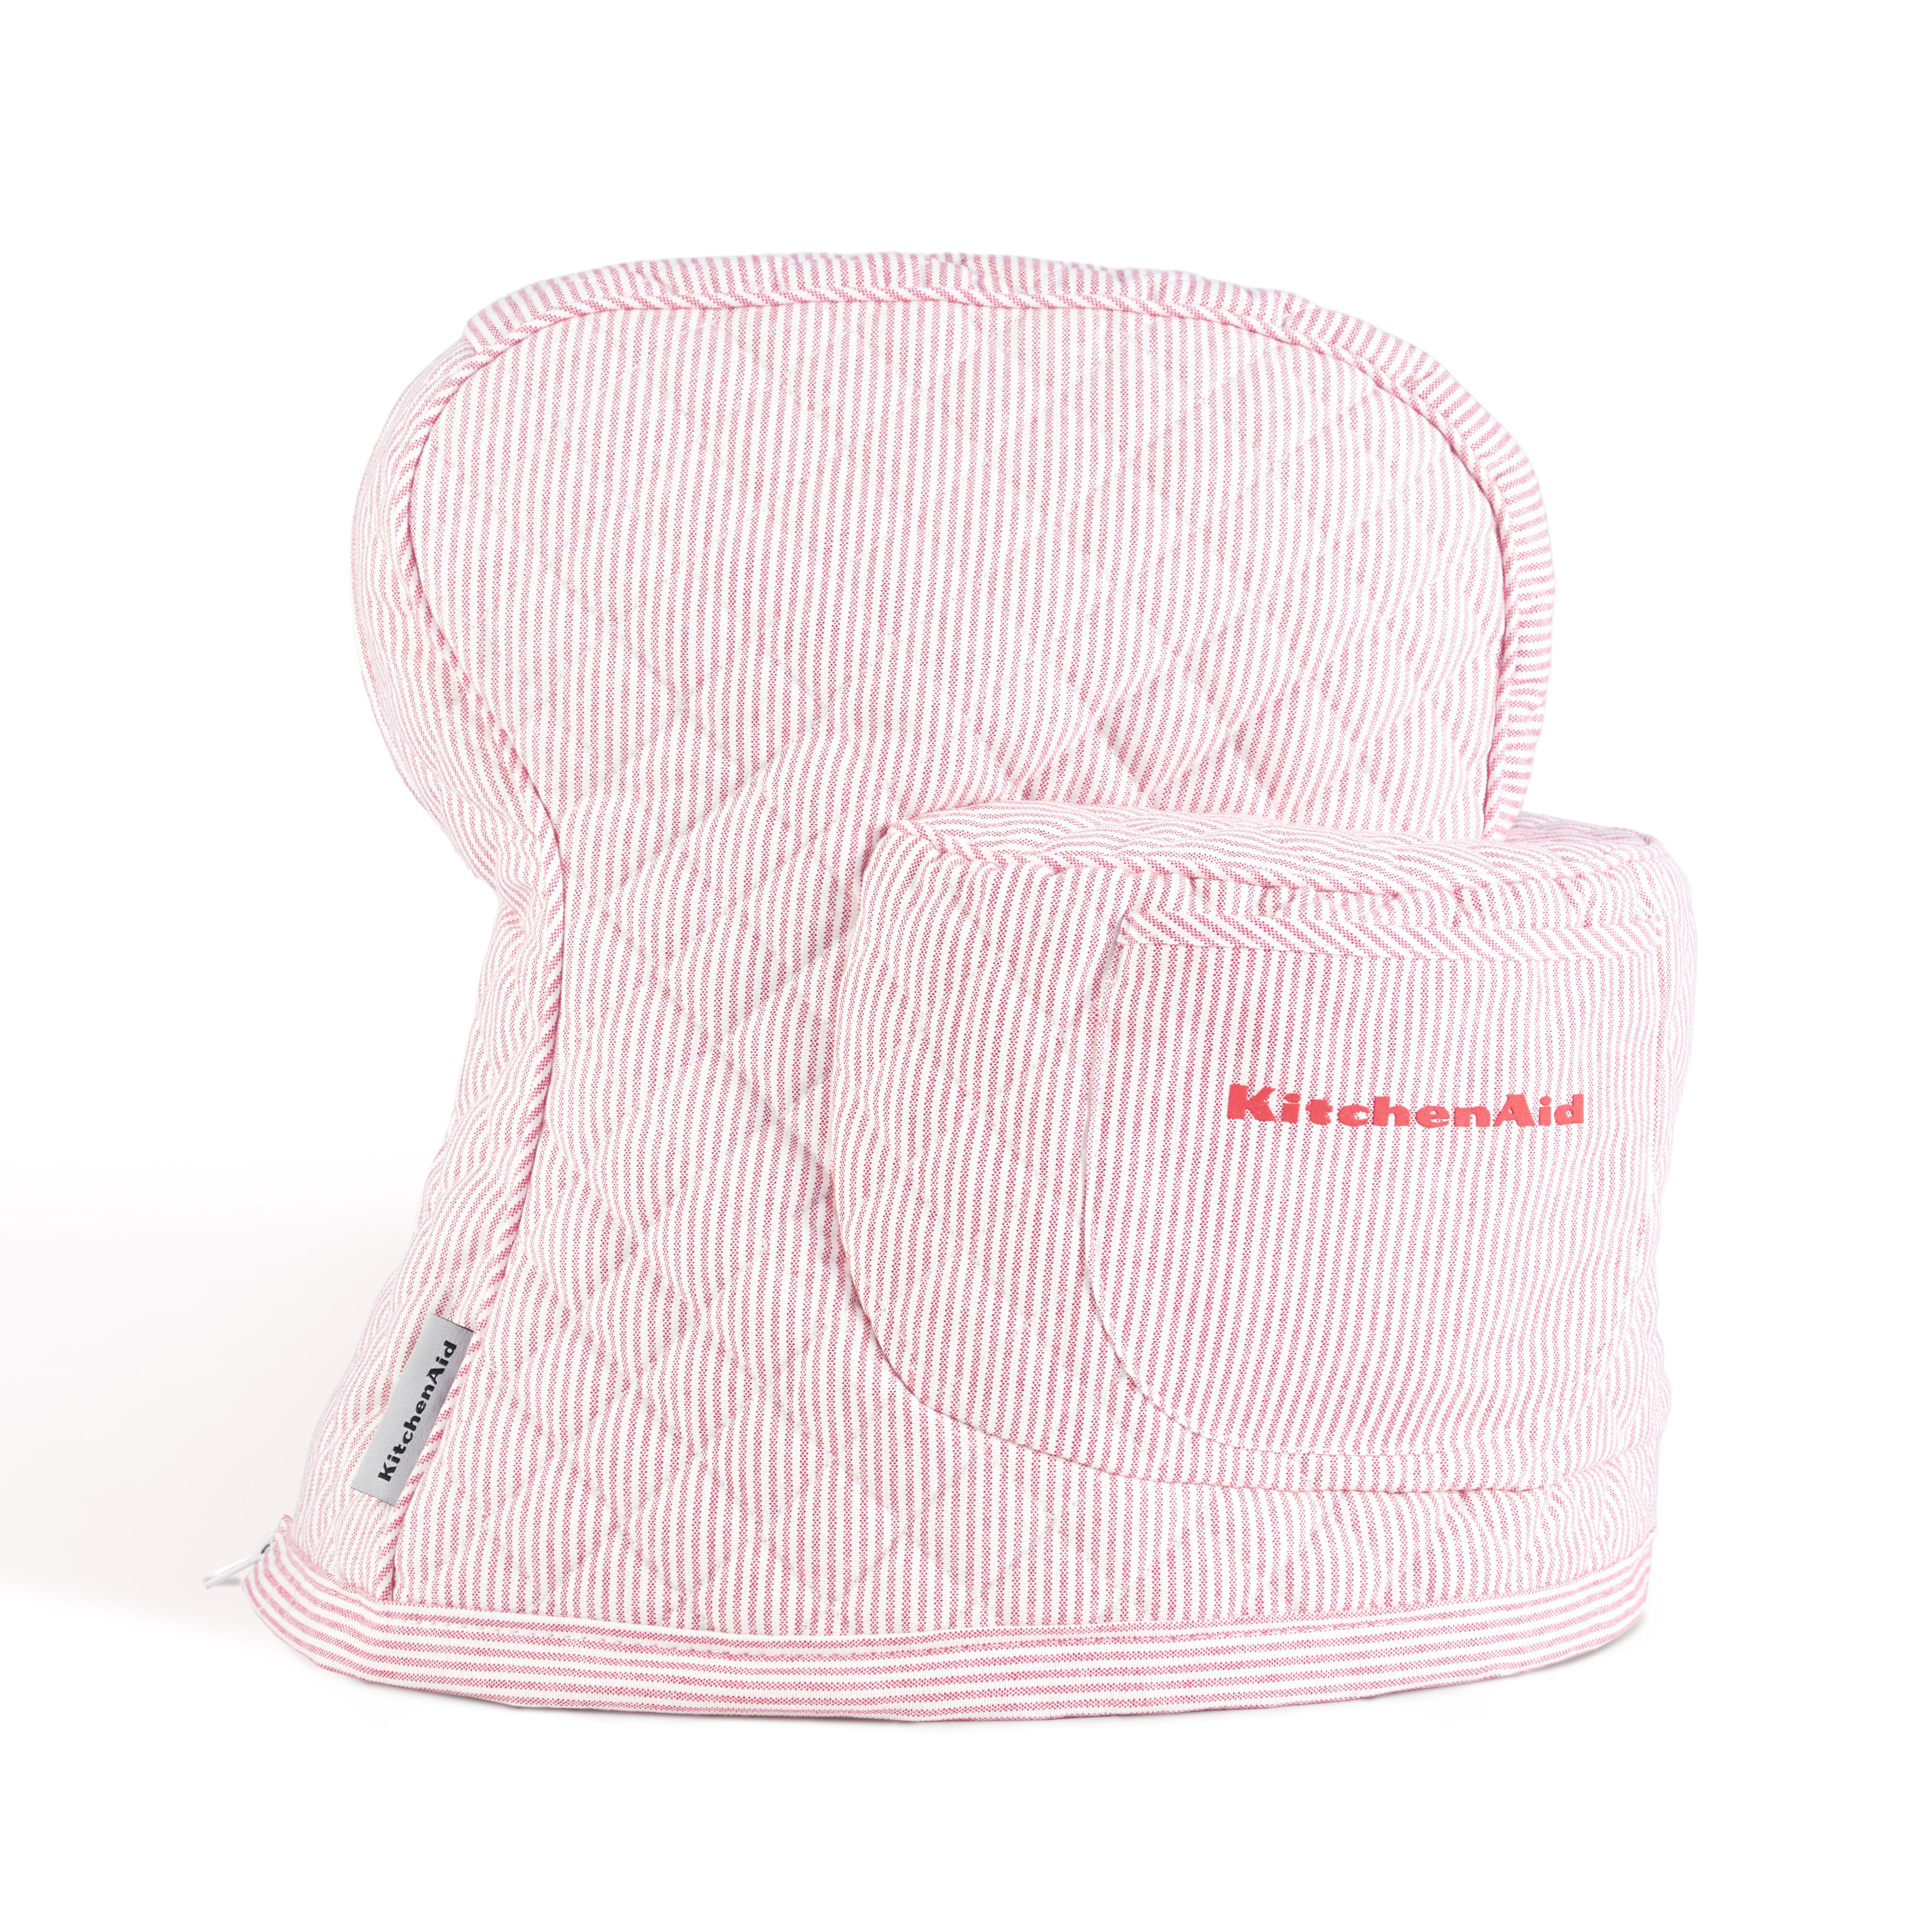 KitchenAid Fitted Tilt-Head Ticking Stripe Stand Mixer Cover with Storage Pocket, Quilted 100% Cotton, Hibiscus Pink, 14.4 inchx18 inchx10 inch